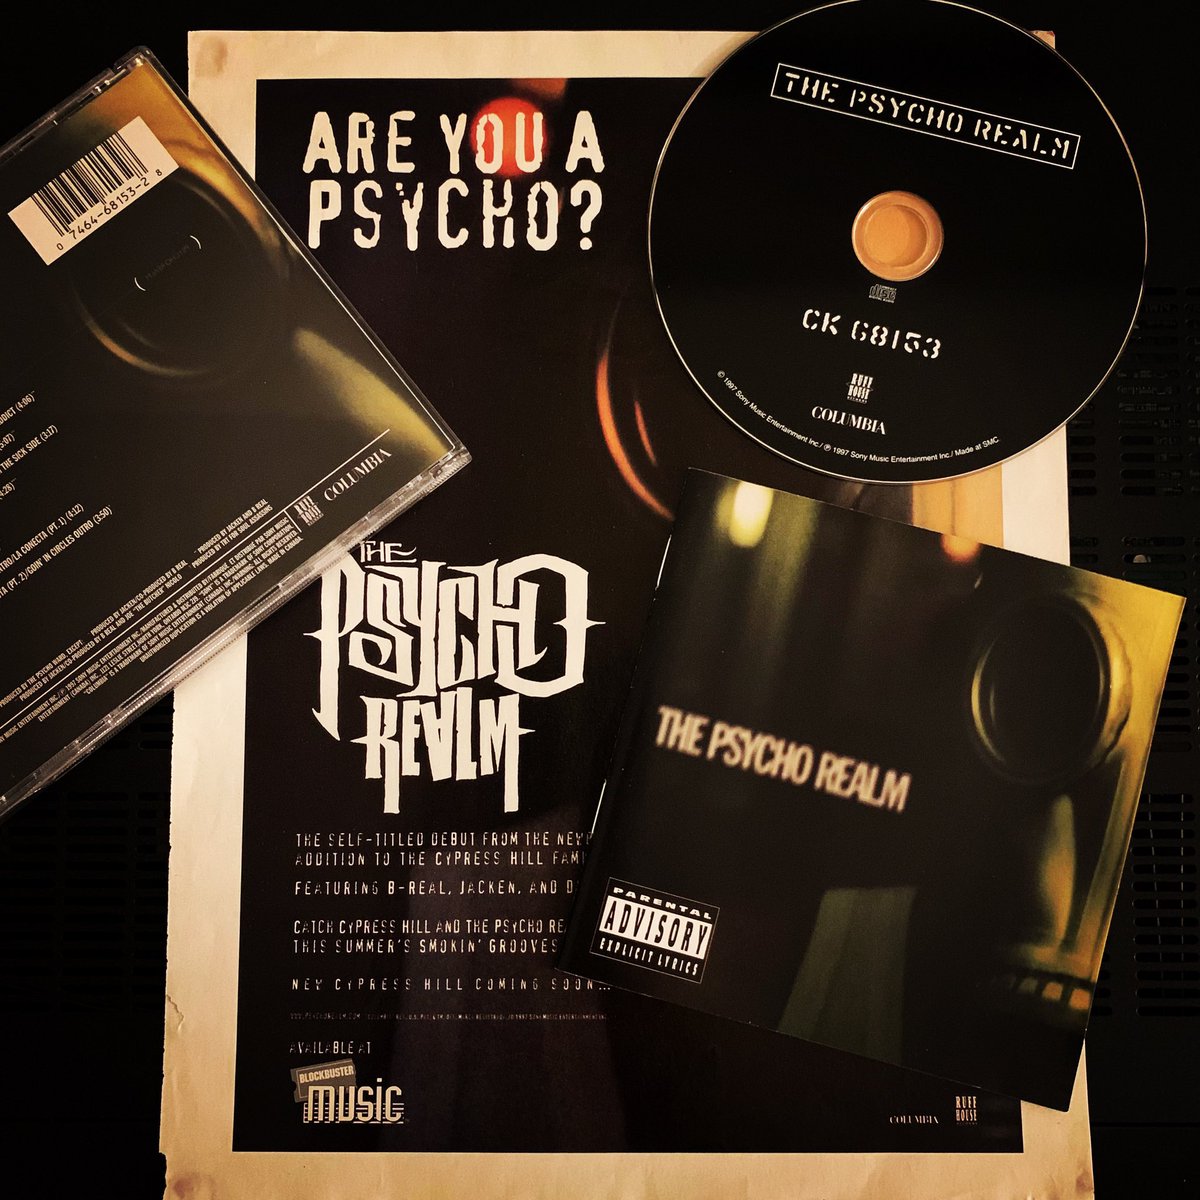 @PsychoRealm
#psycho #city #blocks #showdown #thebigpayback #premonitions #stonegarden #temporary #insanity #confessionsofadrugaddict #whoareyou #bullets #loveletters #lovefromthesickside #ruexperienced #psyclones #lostcities #laconecta #goinincircles #ruffhouse #records